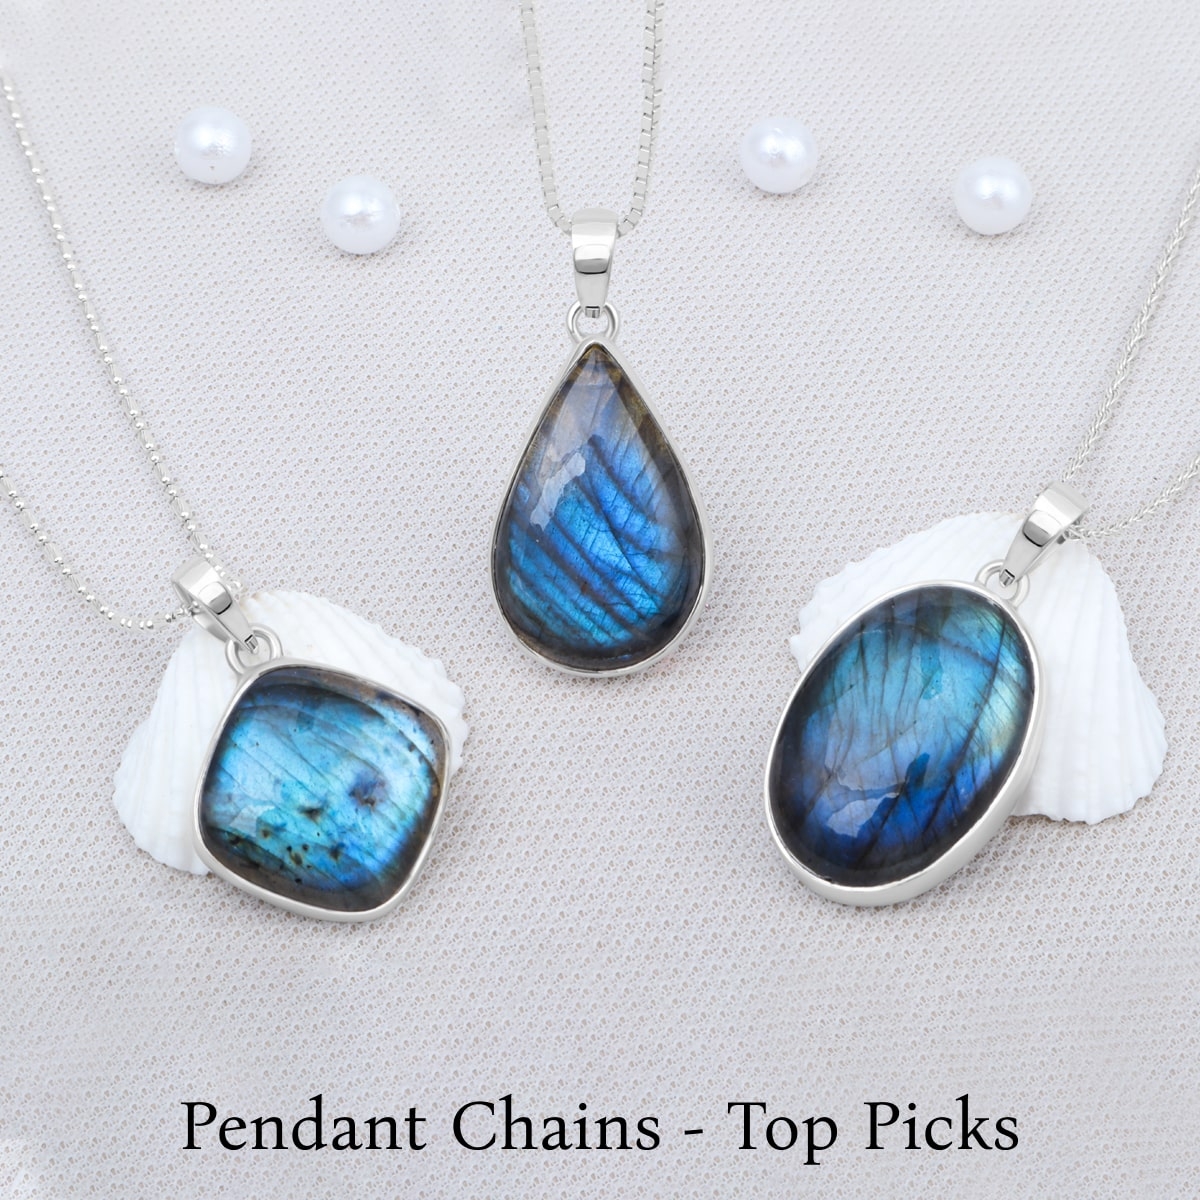 Type of Chain for Pendants